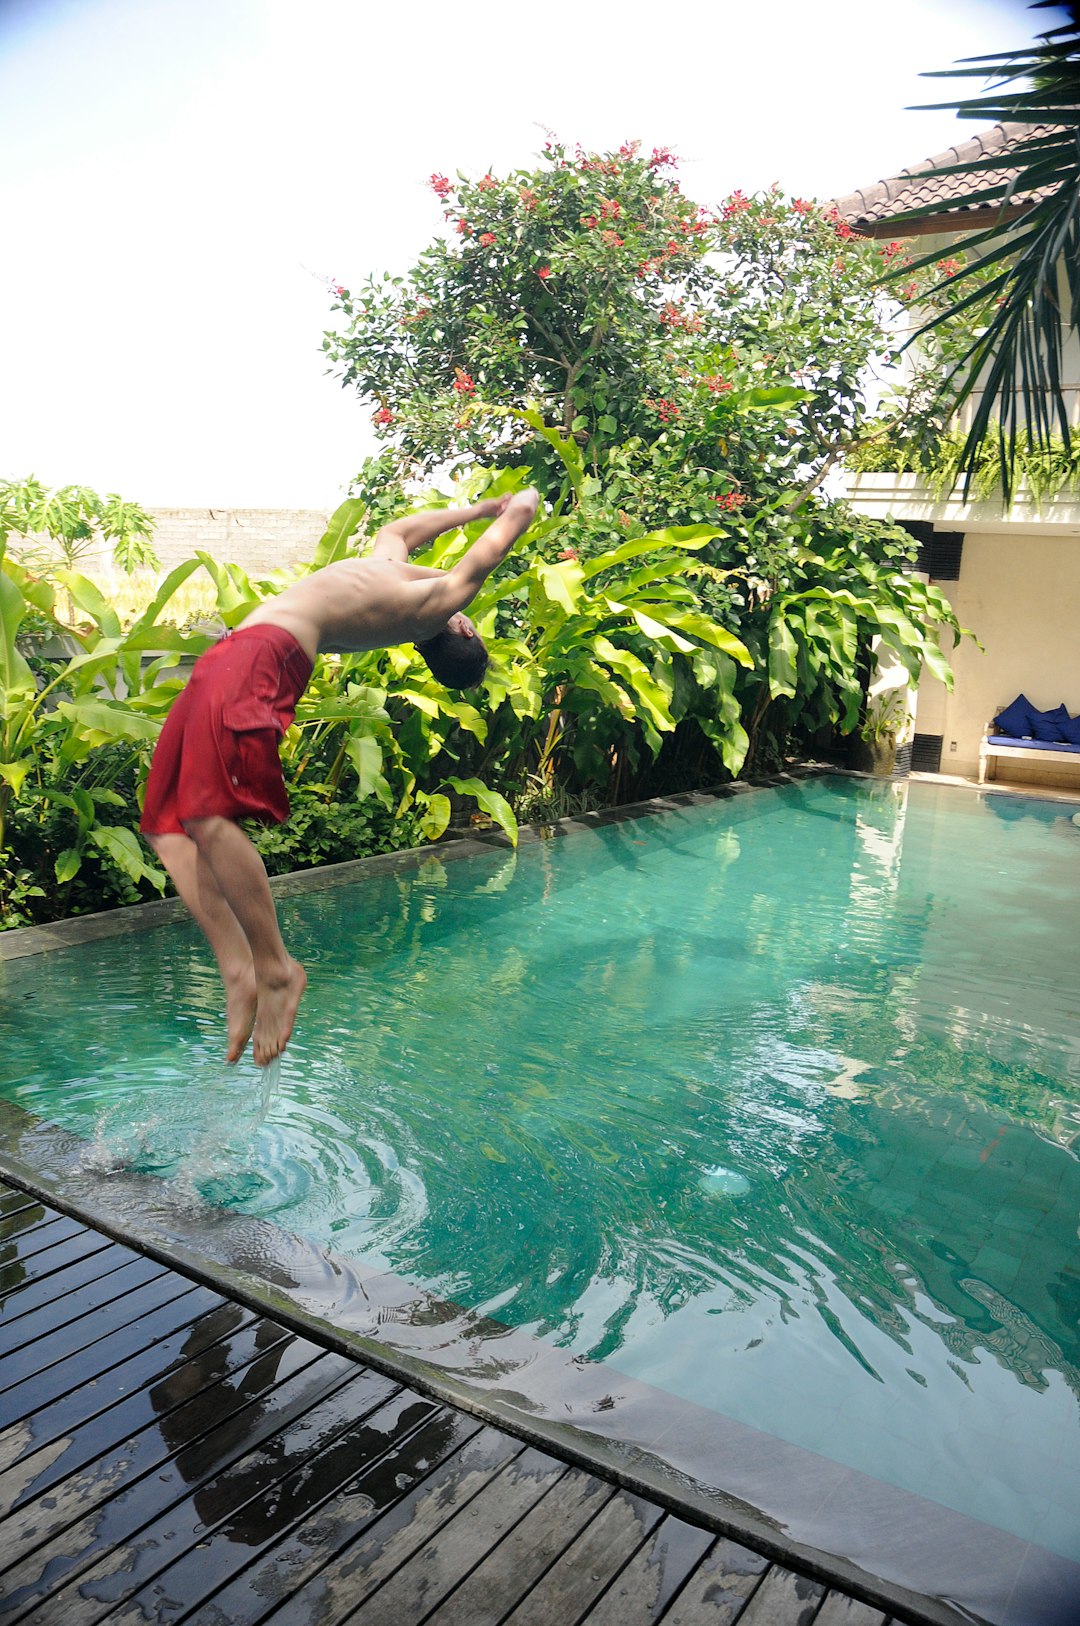 man in red shorts jumping on pool during daytime